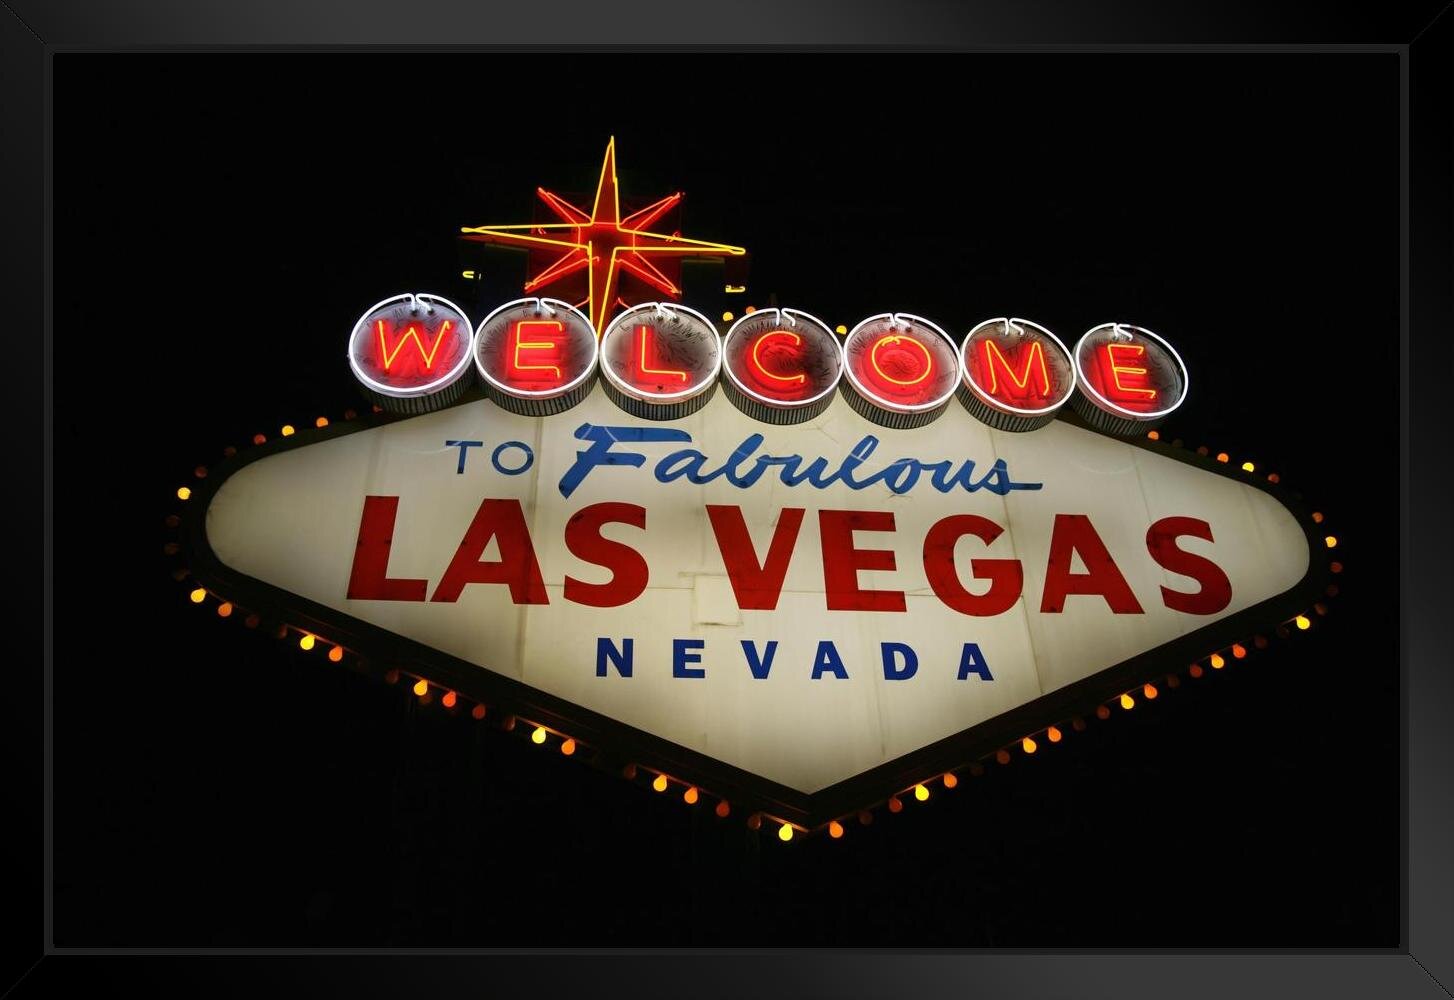 HD wallpaper: Welcome to fabulous Las Vegas Nevada signage, USA, signs,  neon